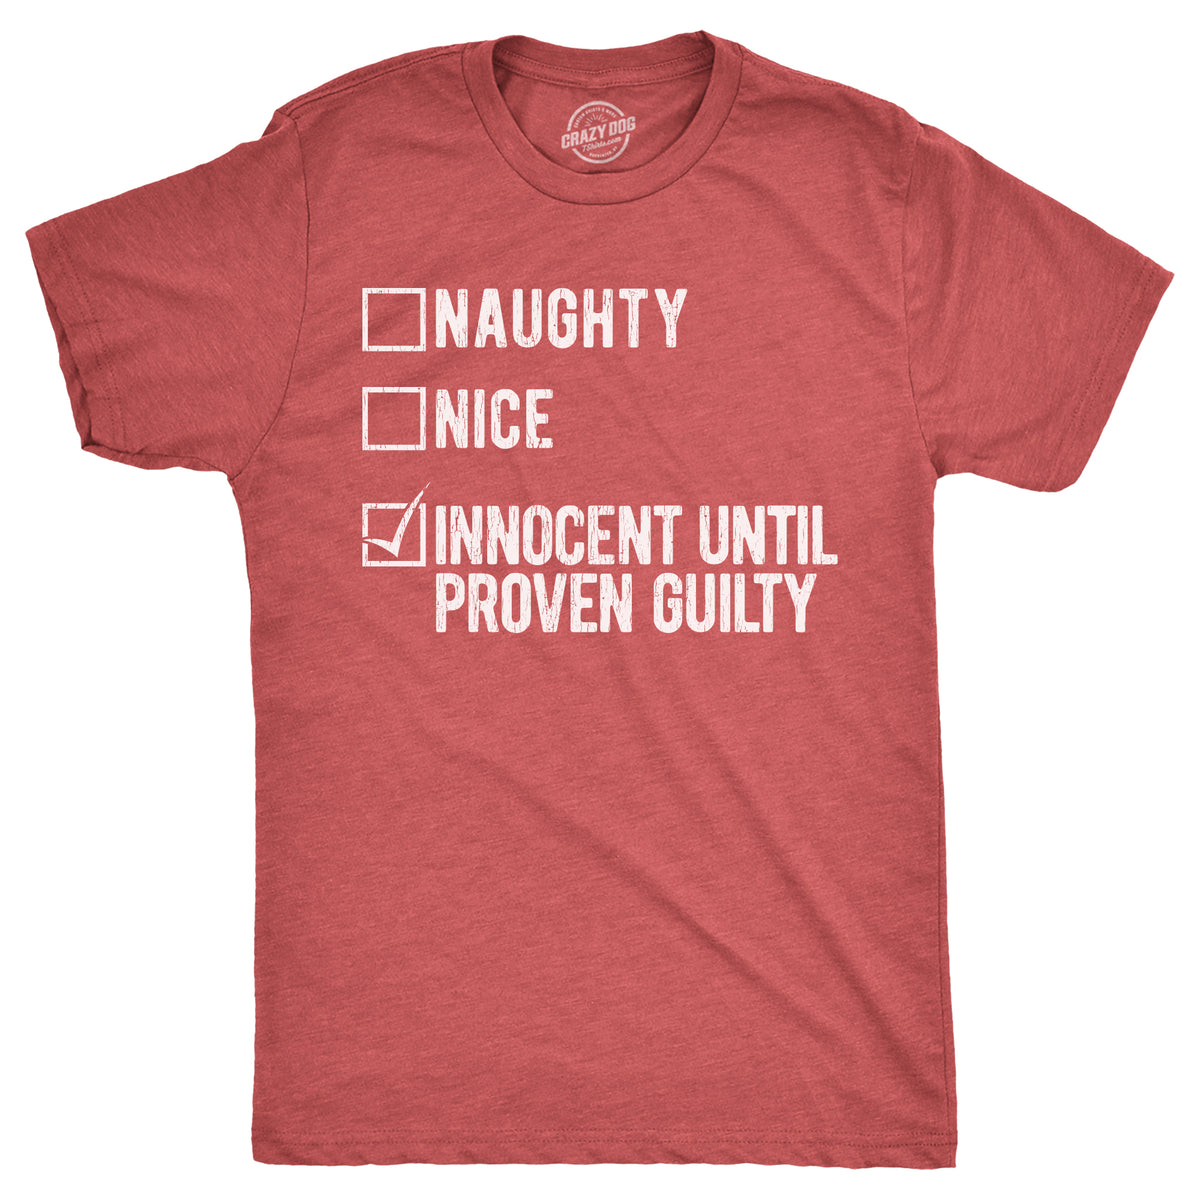 Funny Heather Red - INNOCENT Naughty Nice Innocent Until Proven Guilty Mens T Shirt Nerdy Christmas sarcastic Tee